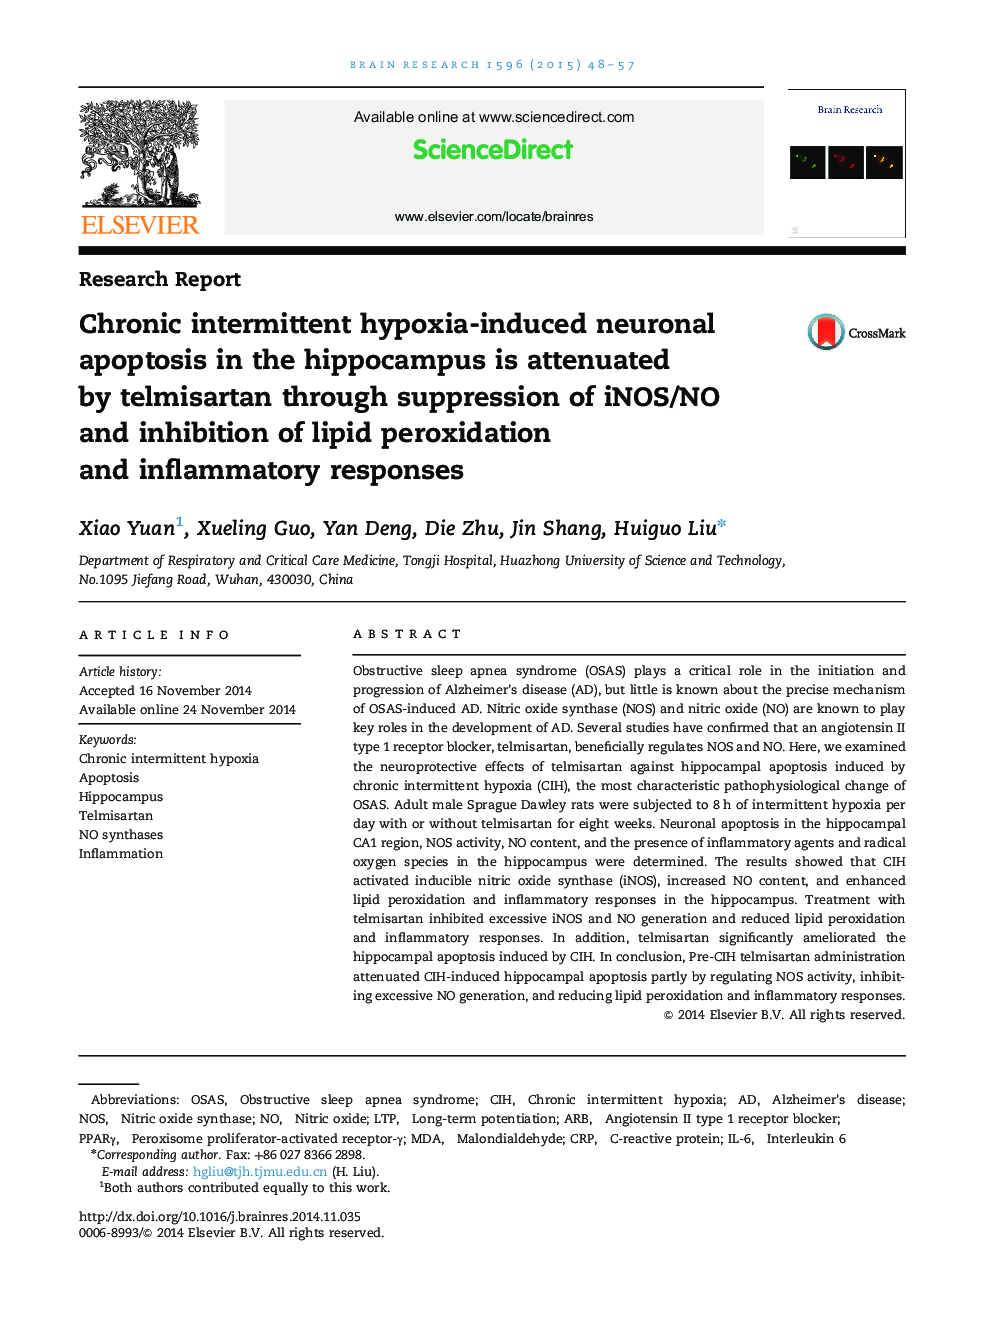 Chronic intermittent hypoxia-induced neuronal apoptosis in the hippocampus is attenuated by telmisartan through suppression of iNOS/NO and inhibition of lipid peroxidation and inflammatory responses